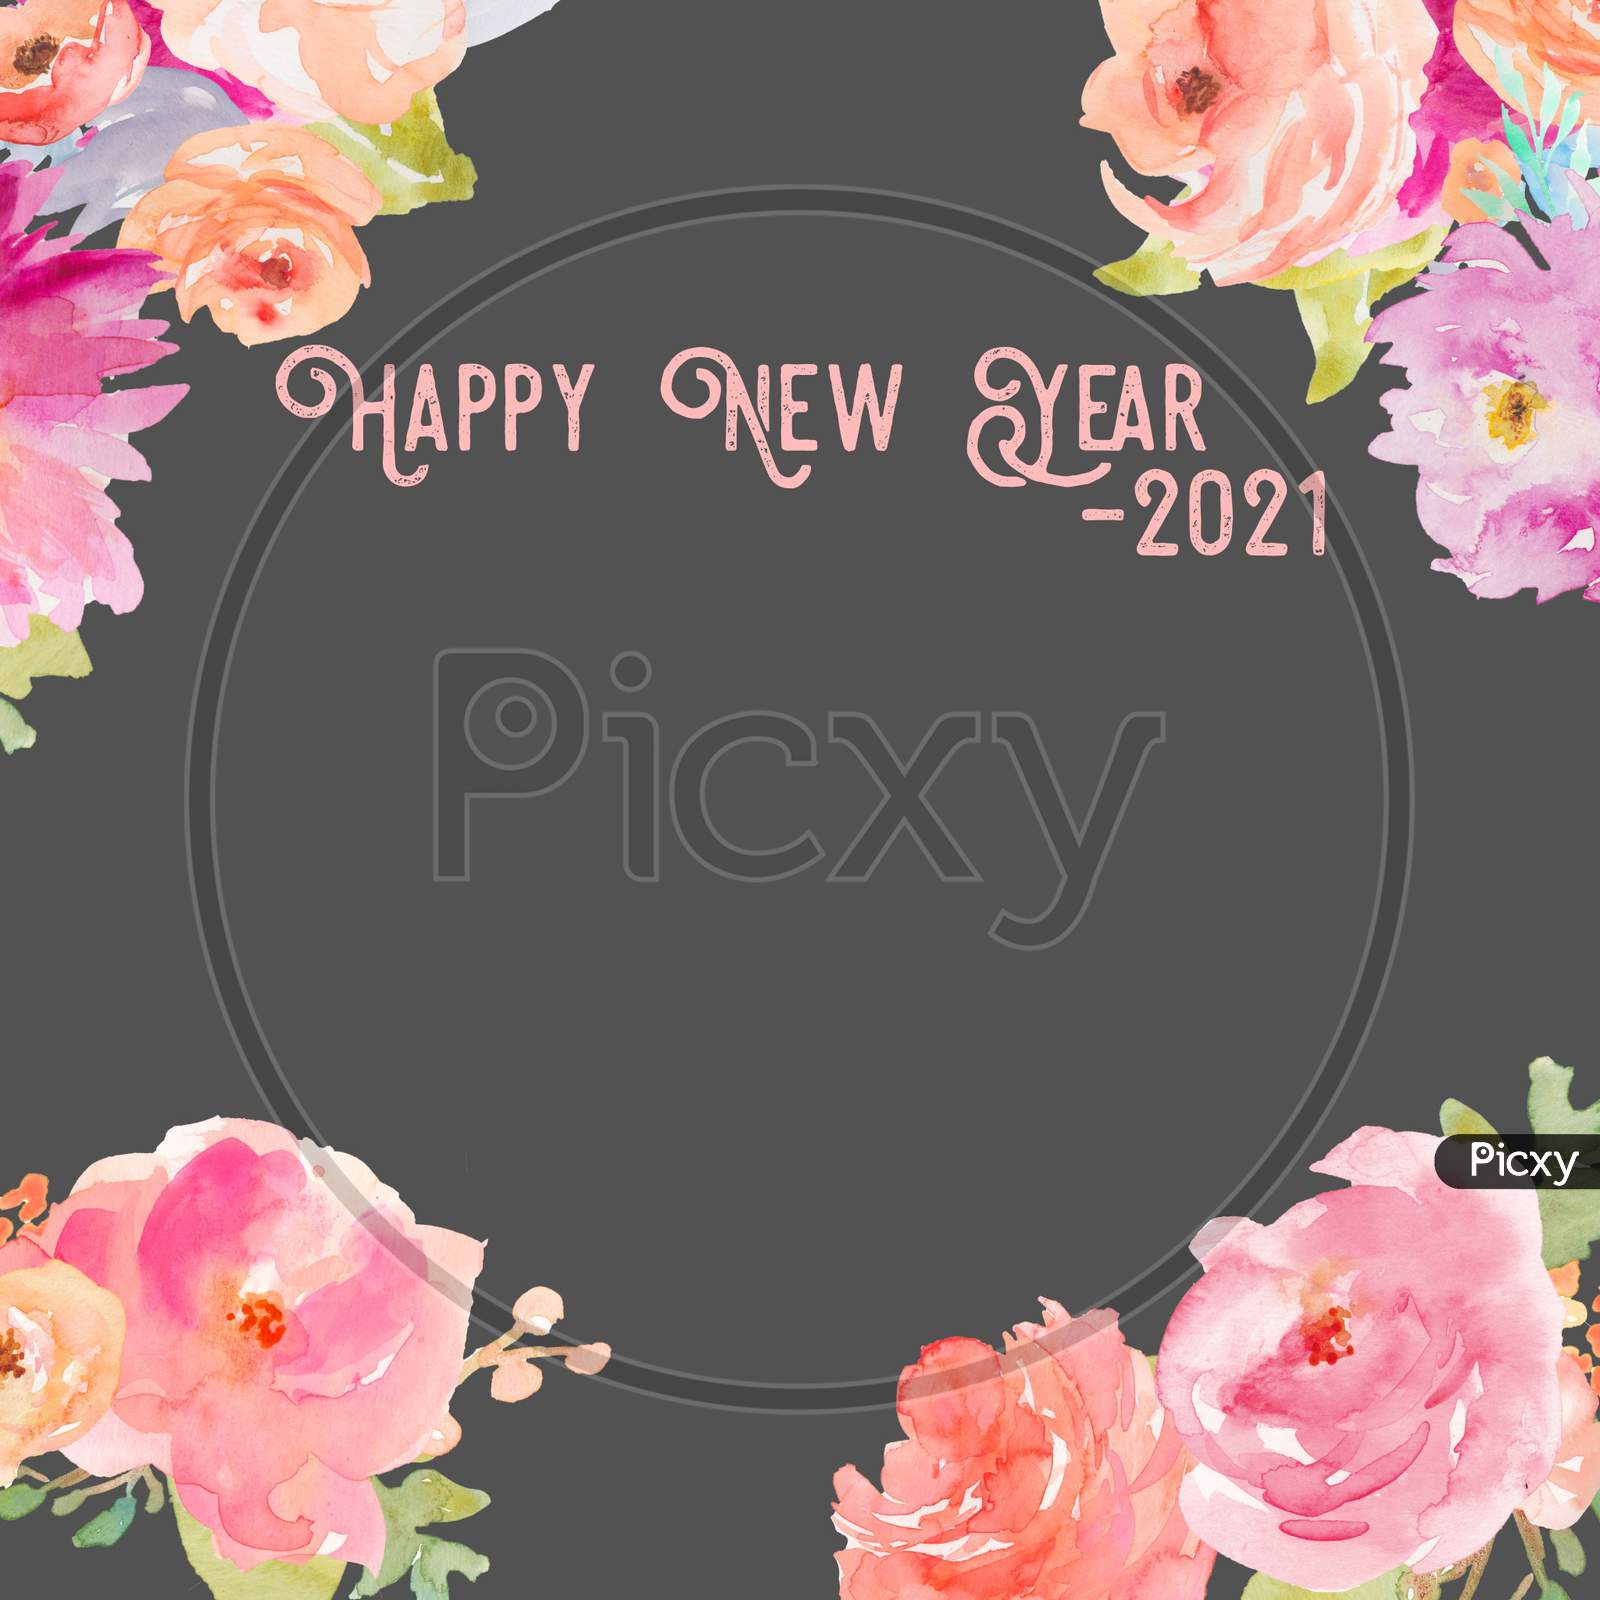 Image With Flowers And Text "Happy New Year 2021"